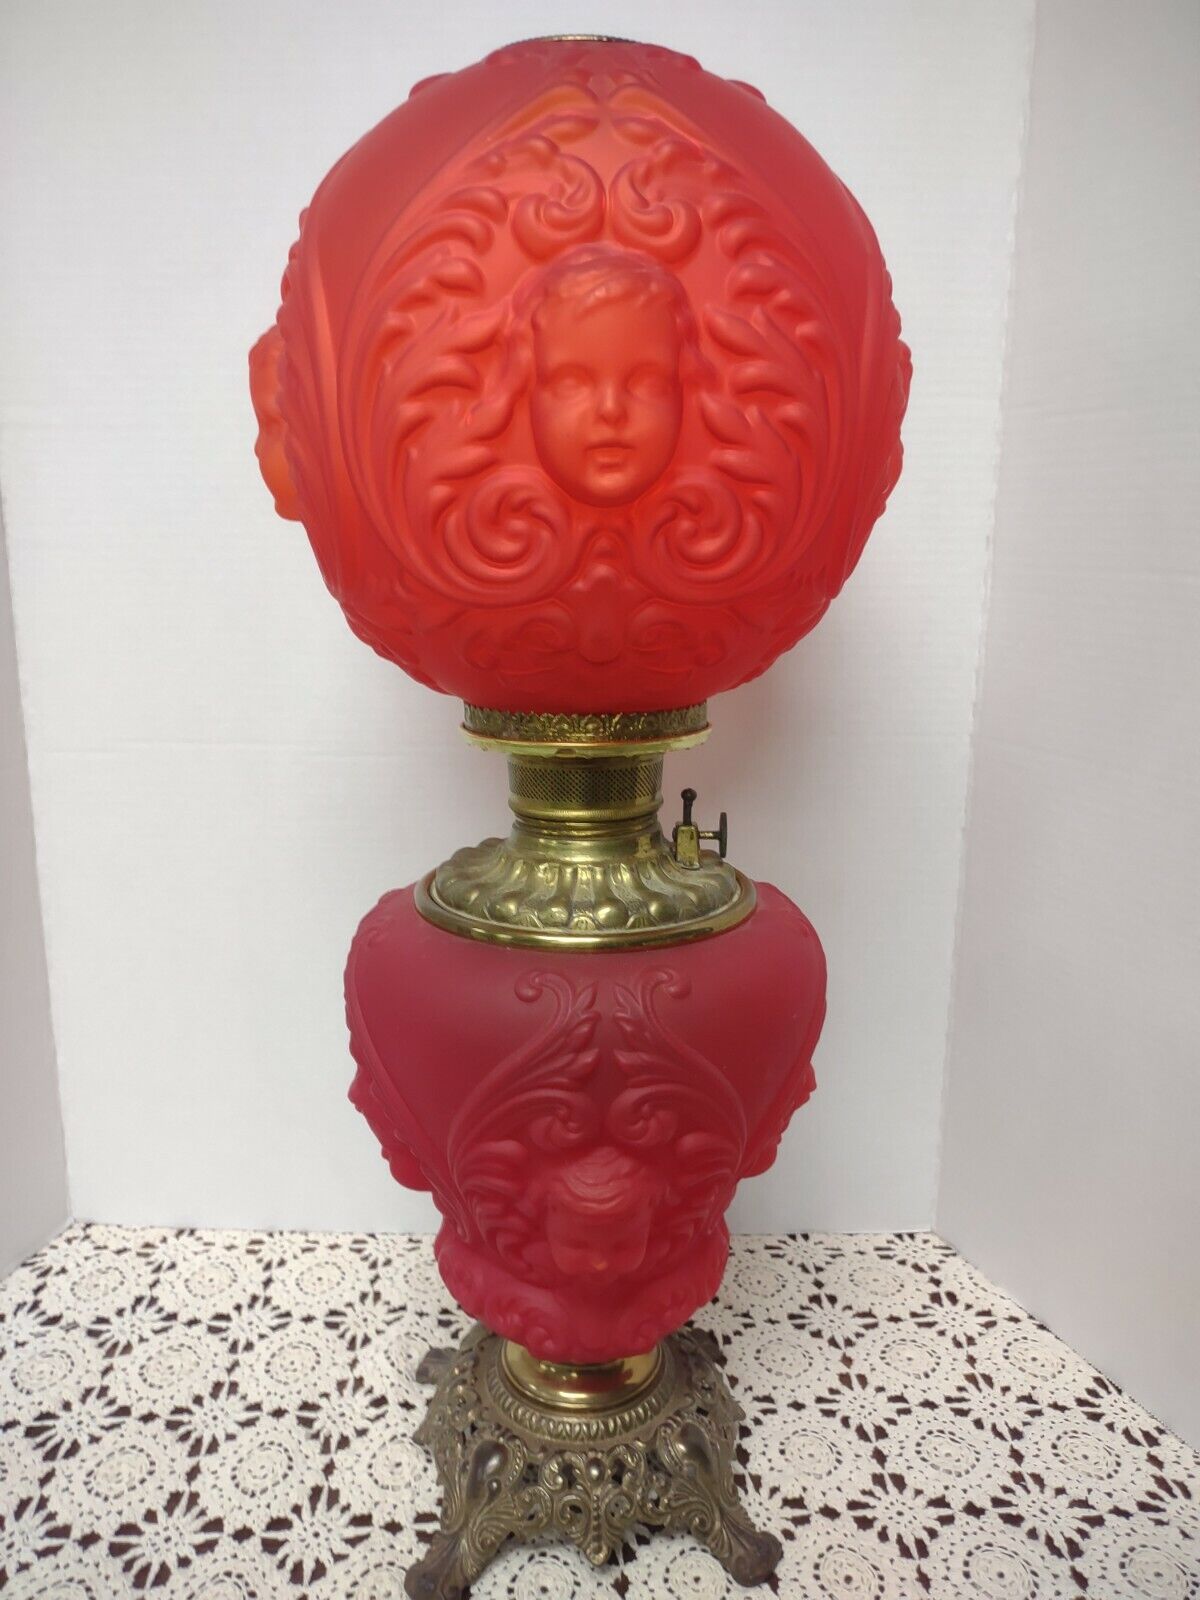 Antique Red Satin Cherub Angel Baby Face GWTW OIL Consolidated Banquet Lamp  